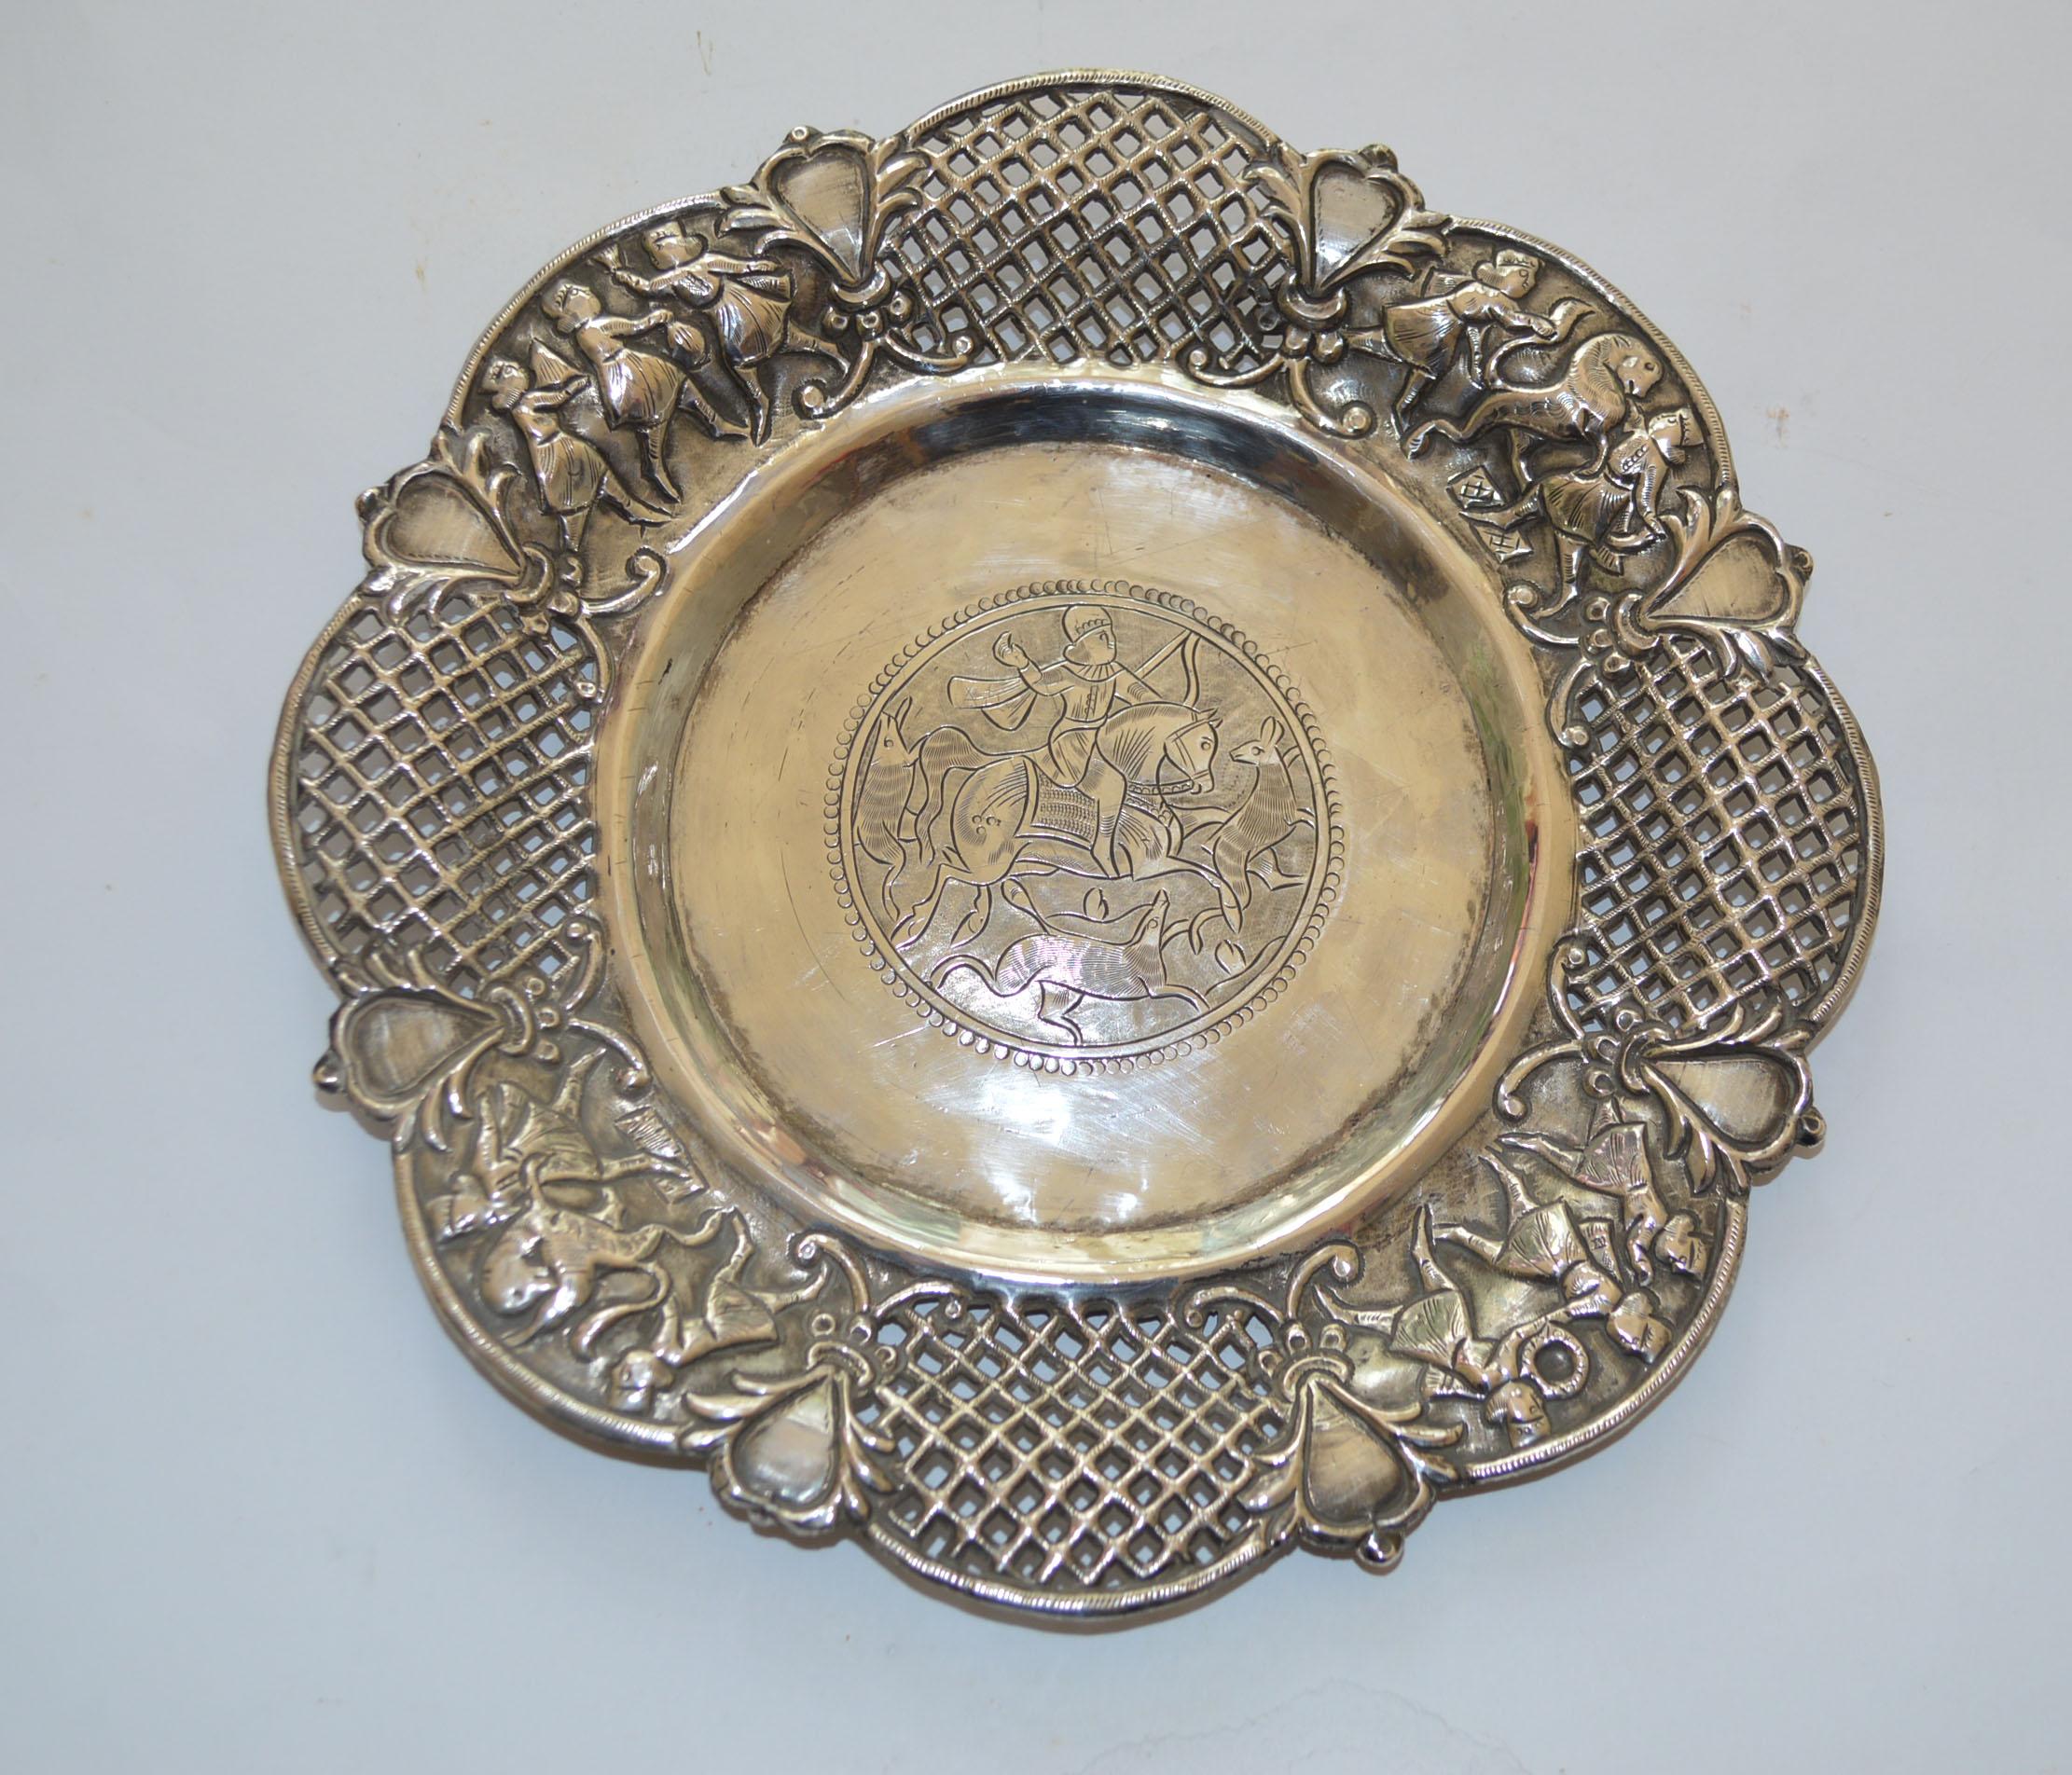 Fine antique Middle Eastern Persian style hand chased hand pierced silver dish. 
Hammered and chased with central scene hunting scene , with intricate pierced open work lattice design edges with 4 figurative scenes. 
Weight 151 grams silver approx